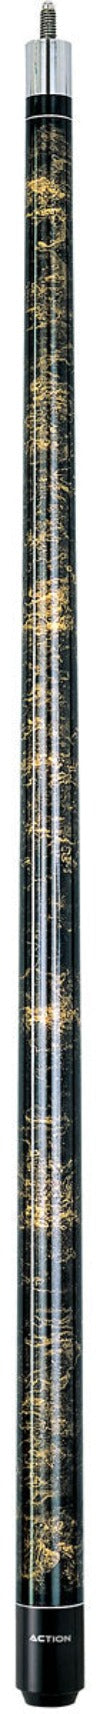 Action VAL04 Pool Cue